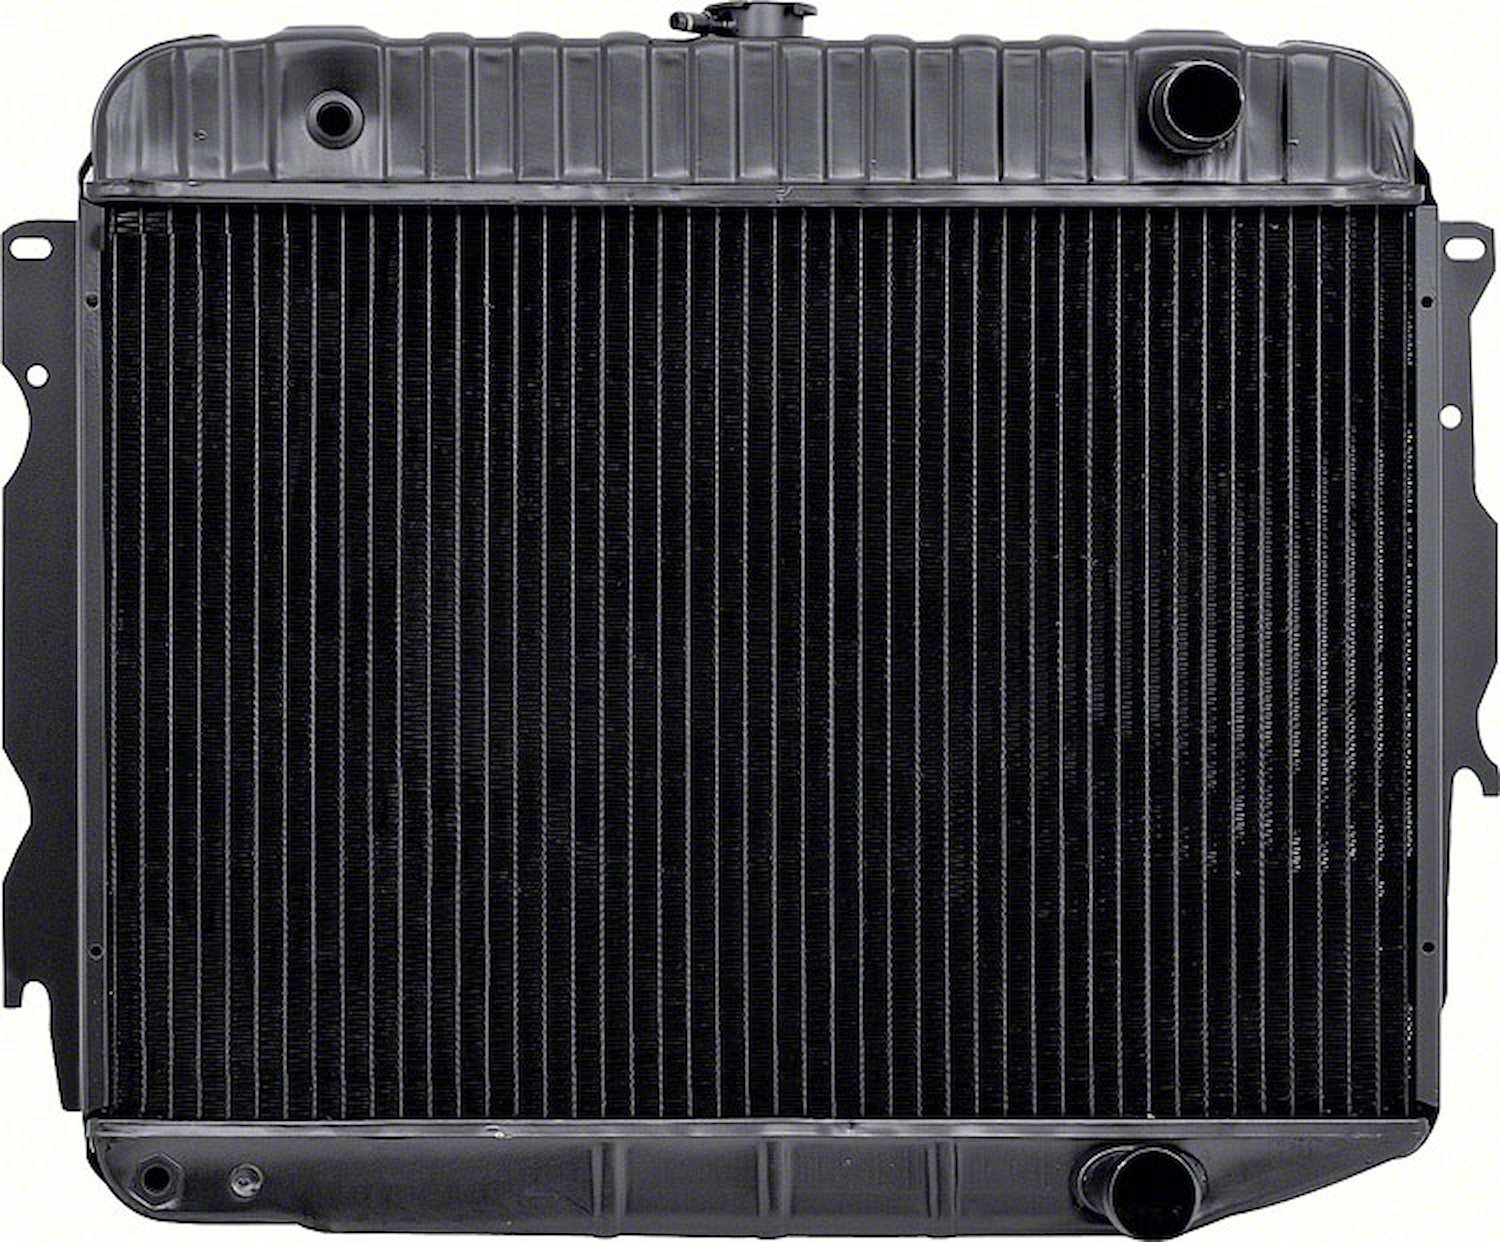 MD2294S Replacement Radiator 1973 Mopar B/E-Body Big Block V8 With Standard Trans 3 Row 26" Wide